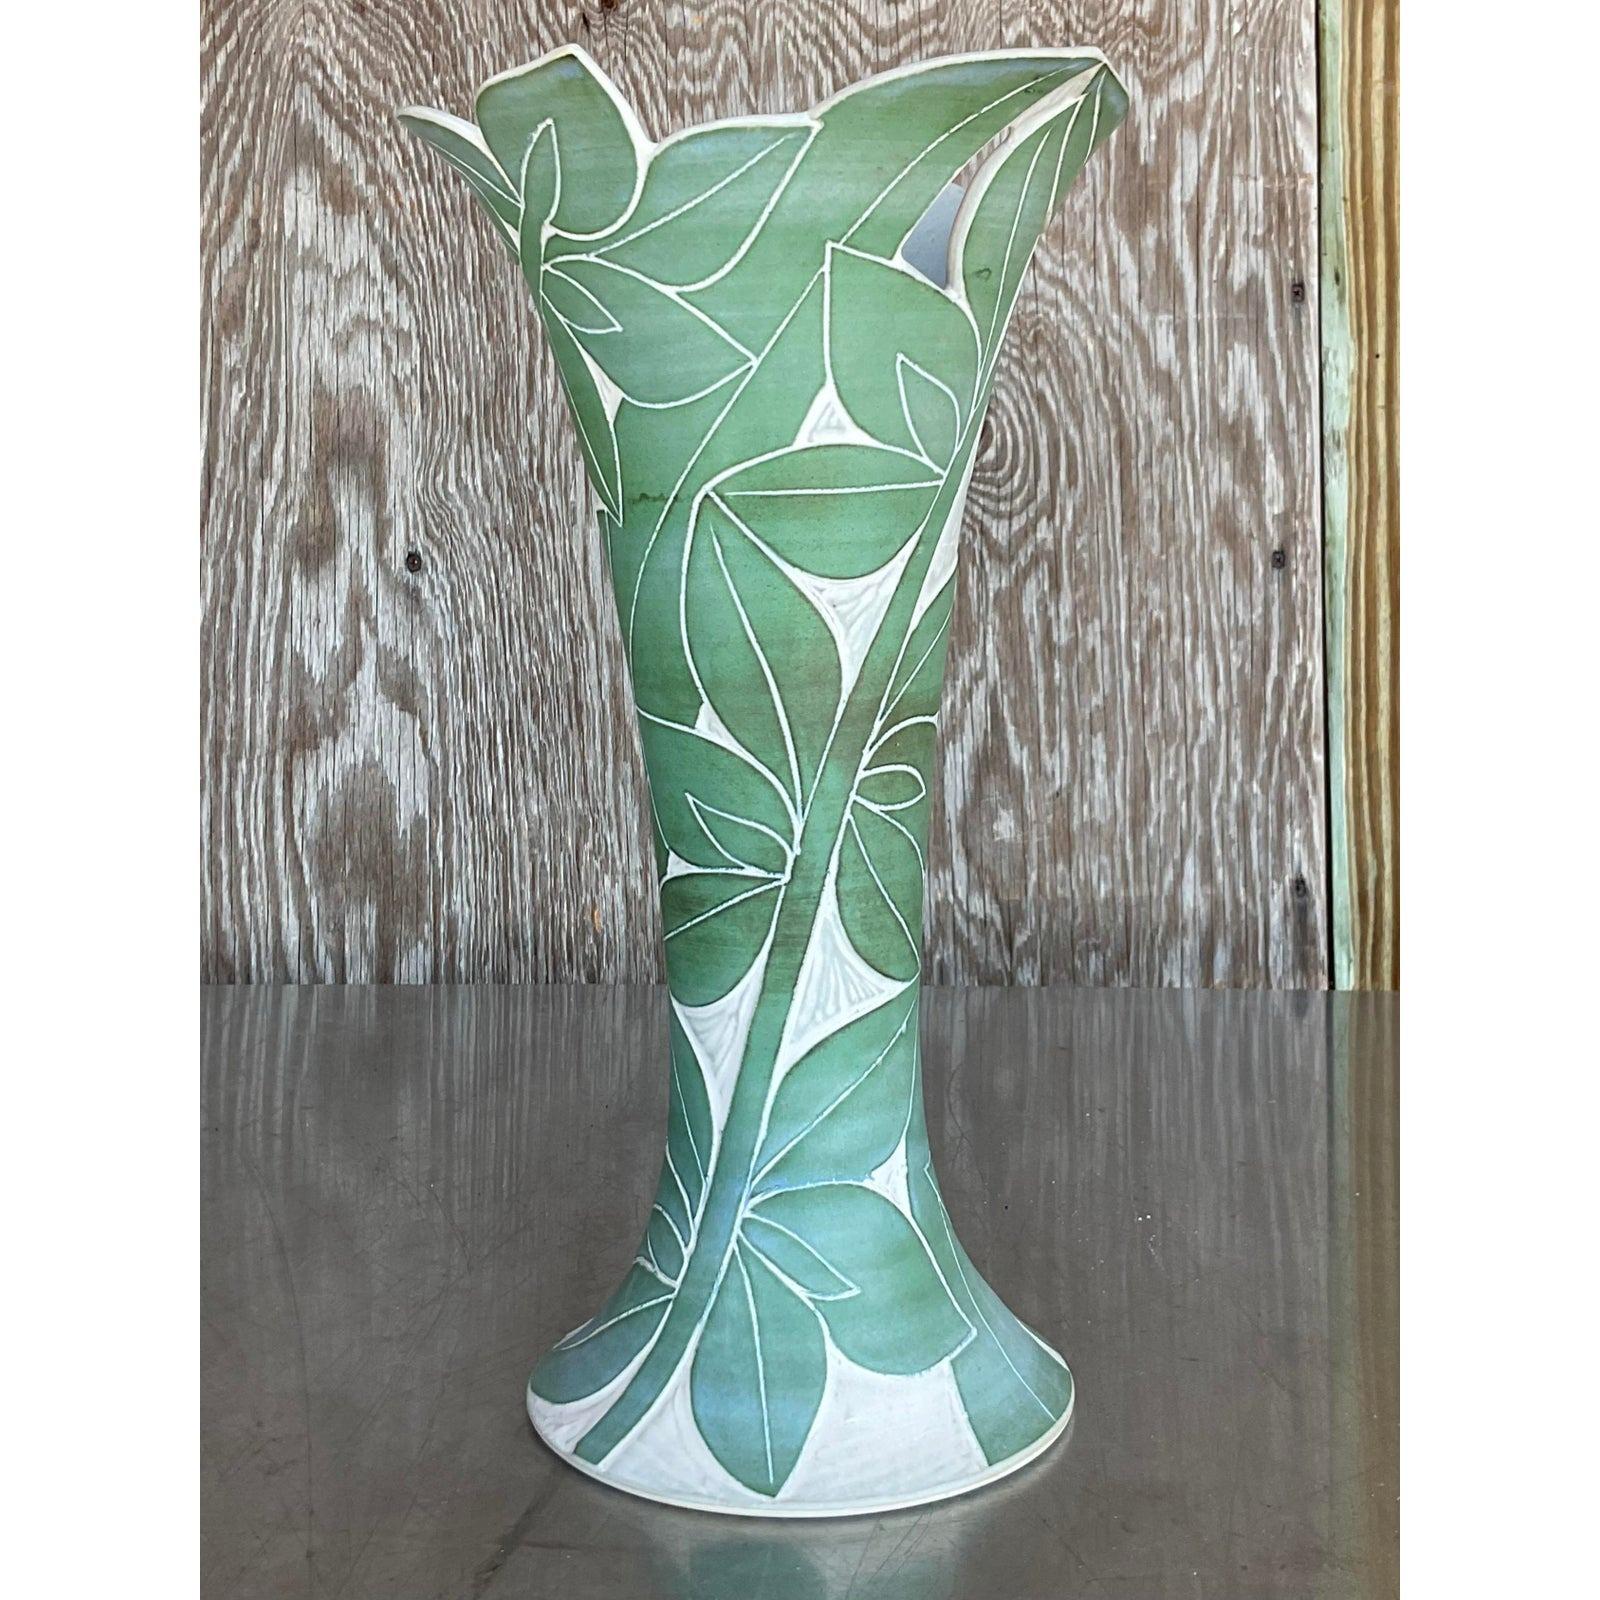 A fabulous vintage palm engraved vase to display some gorgeous flowers in. Acquired at a Palm Beach estate.